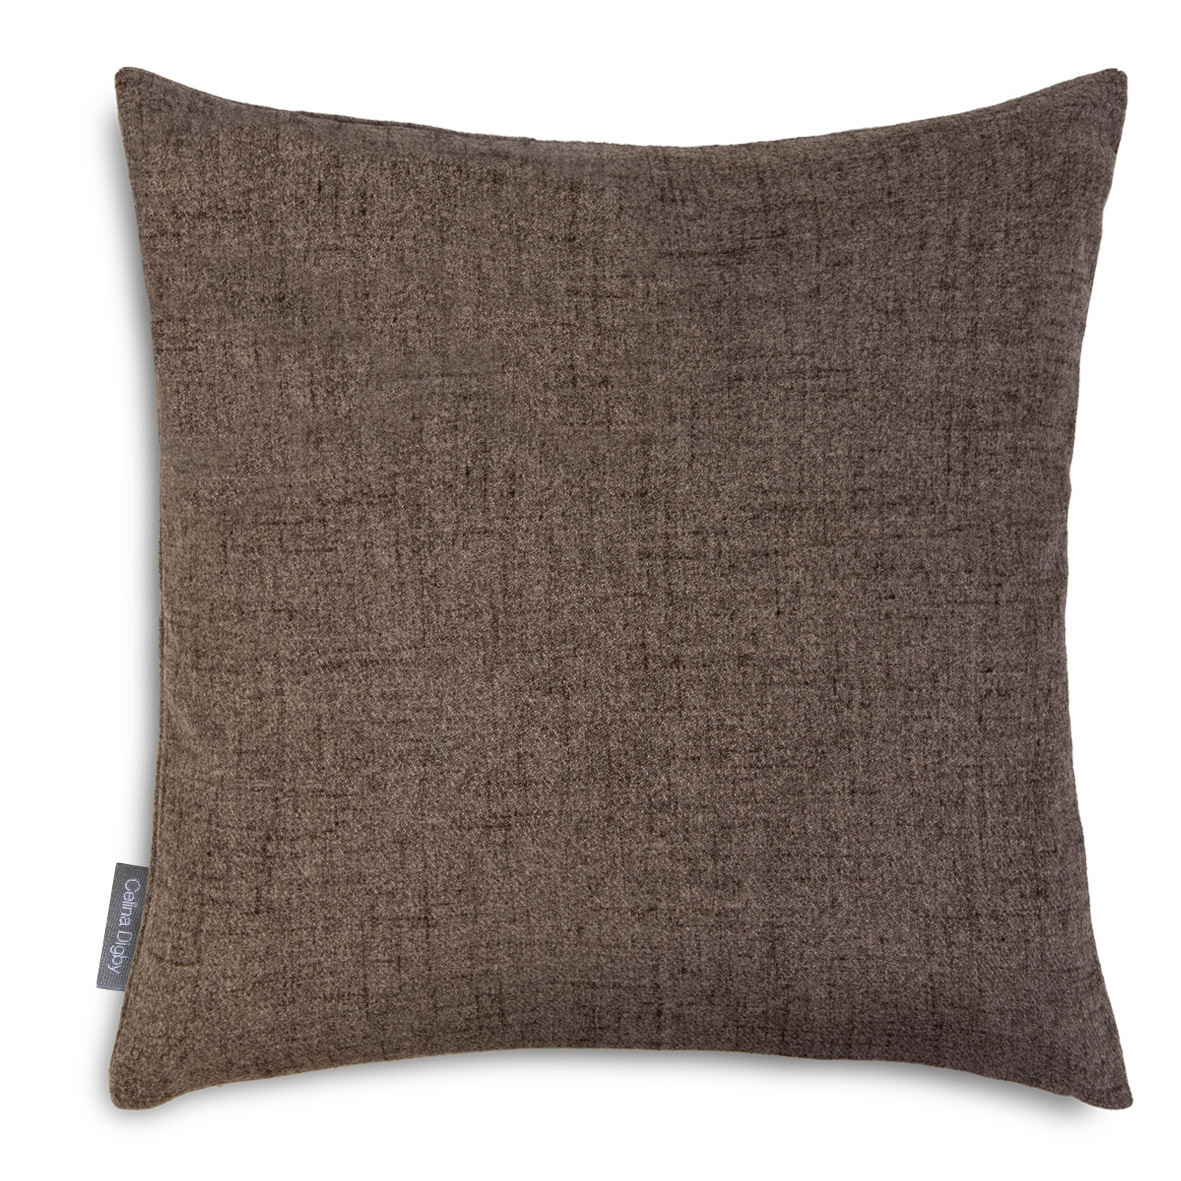 Celina Digby Luxury Wool Effect Cushion – Antique Brown (Available in 2 Sizes) Extra Large (55x55cm) Hollow Fibre Filling